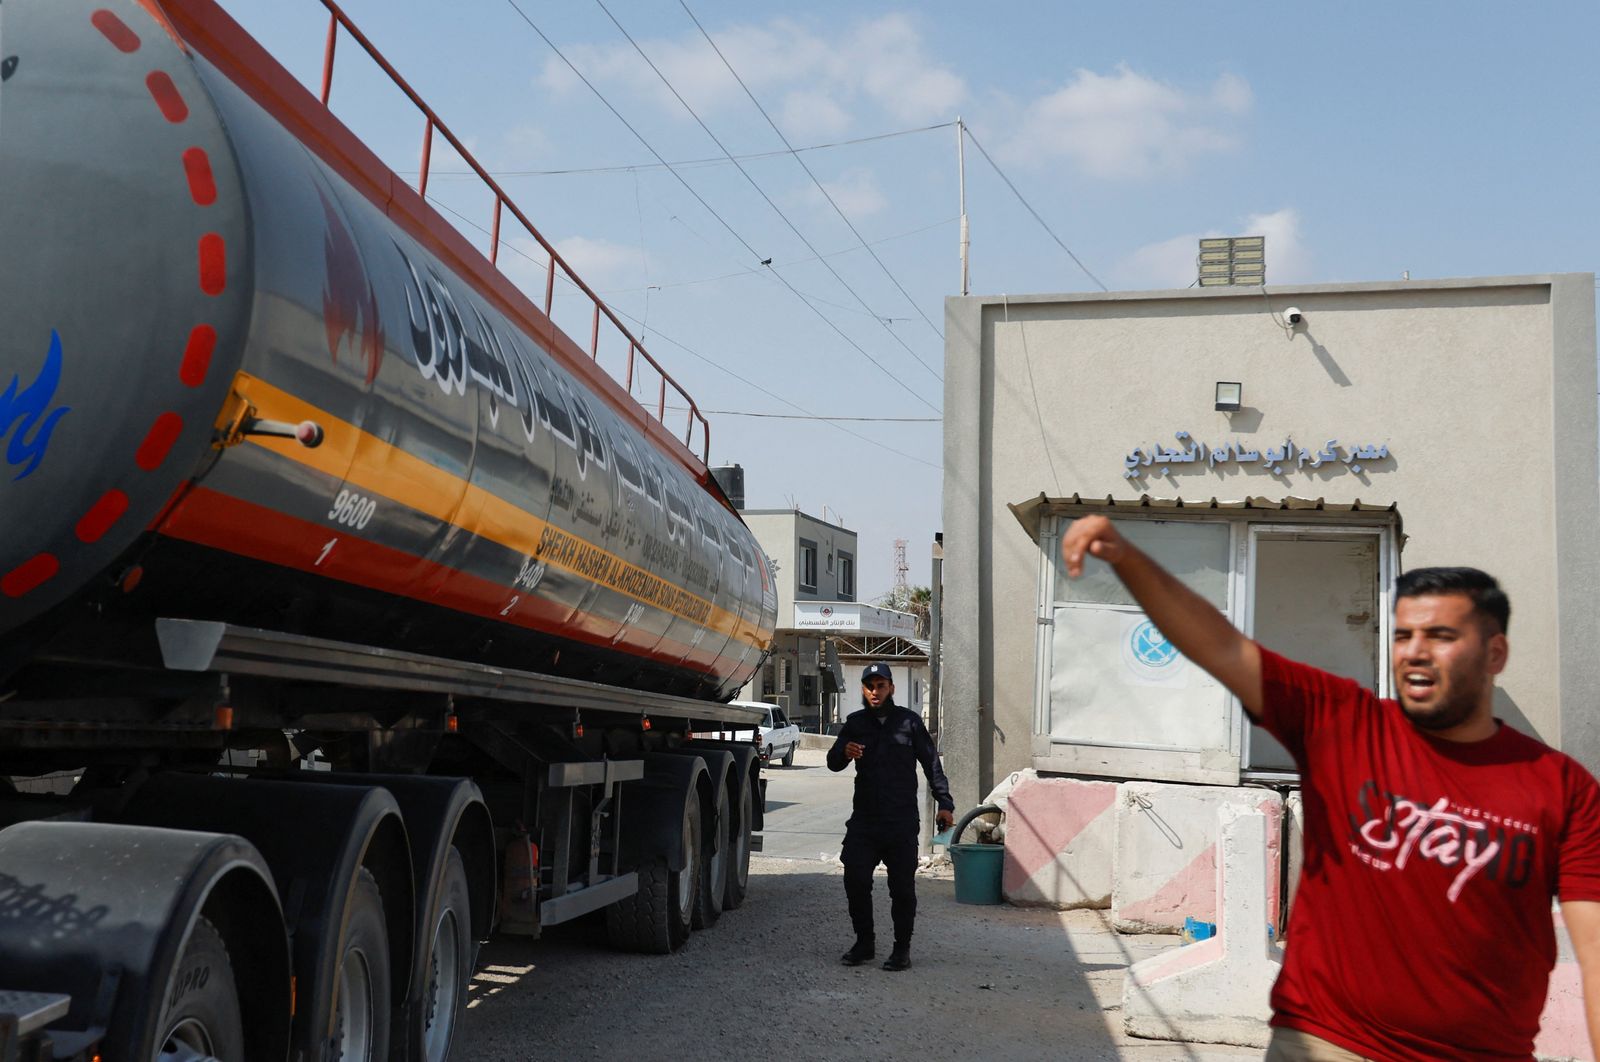 A truck carrying fuel imports for the lone power plant rolls into Gaza, after Israel eased up closures, as ceasefire holds in Rafah - REUTERS